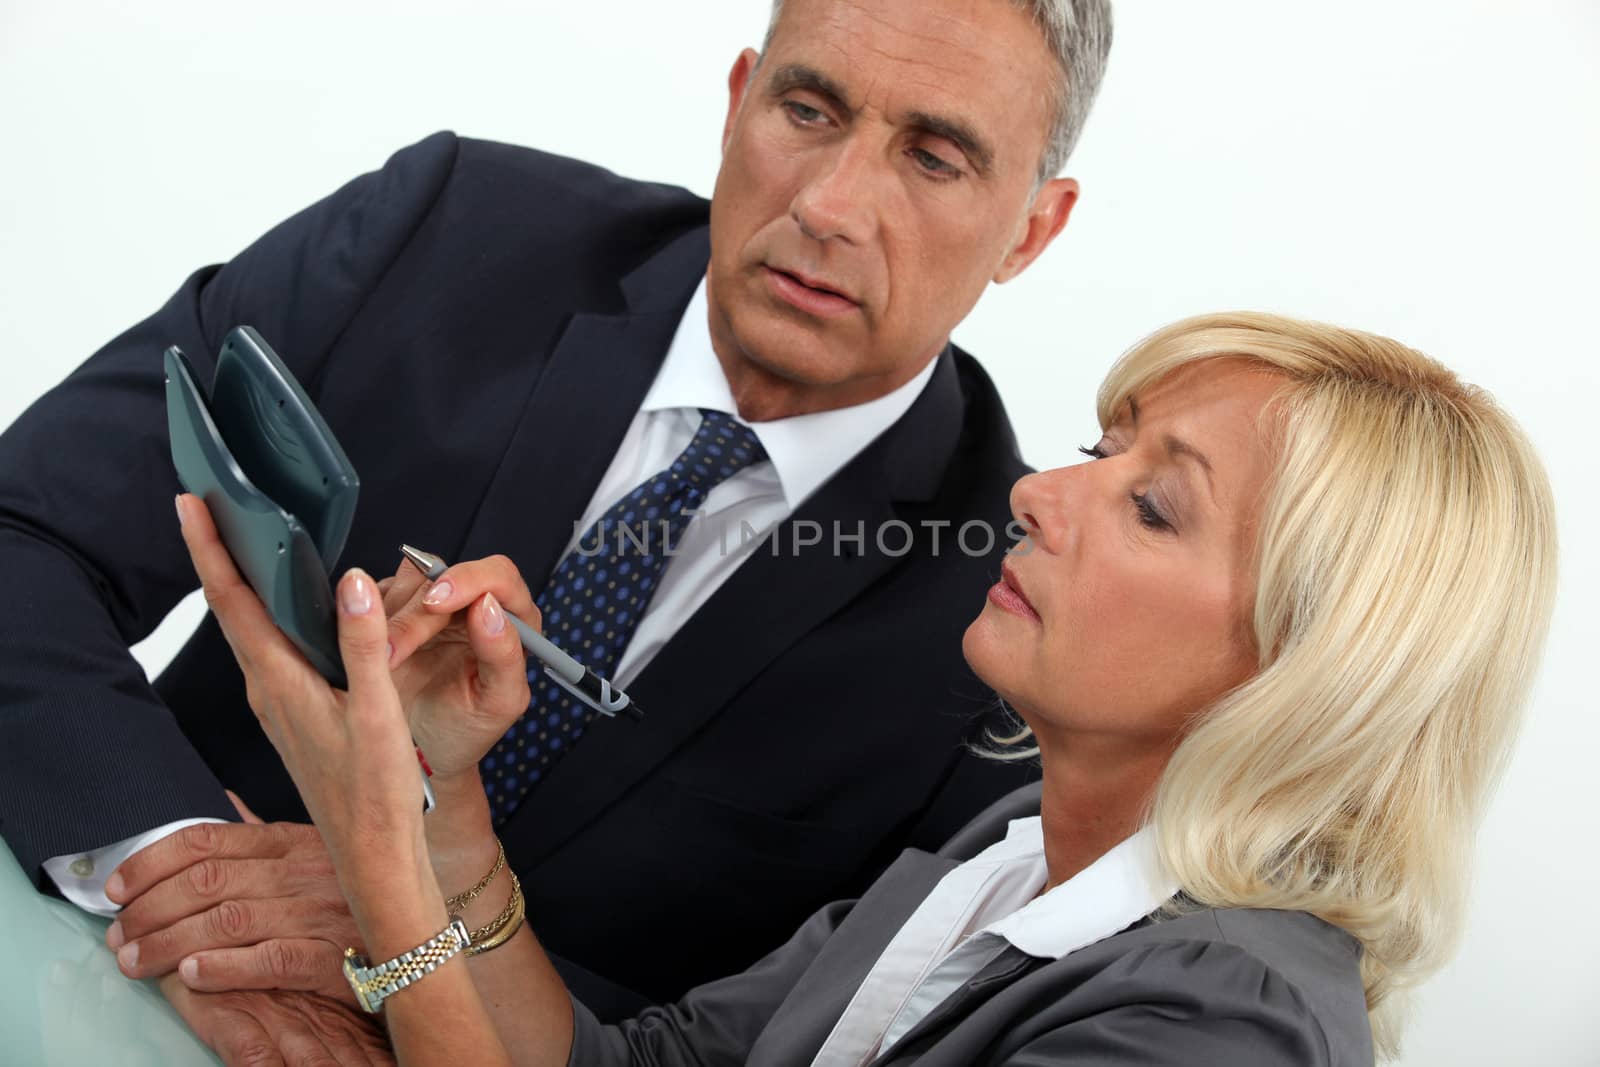 middleaged businessman with female counterpart by phovoir